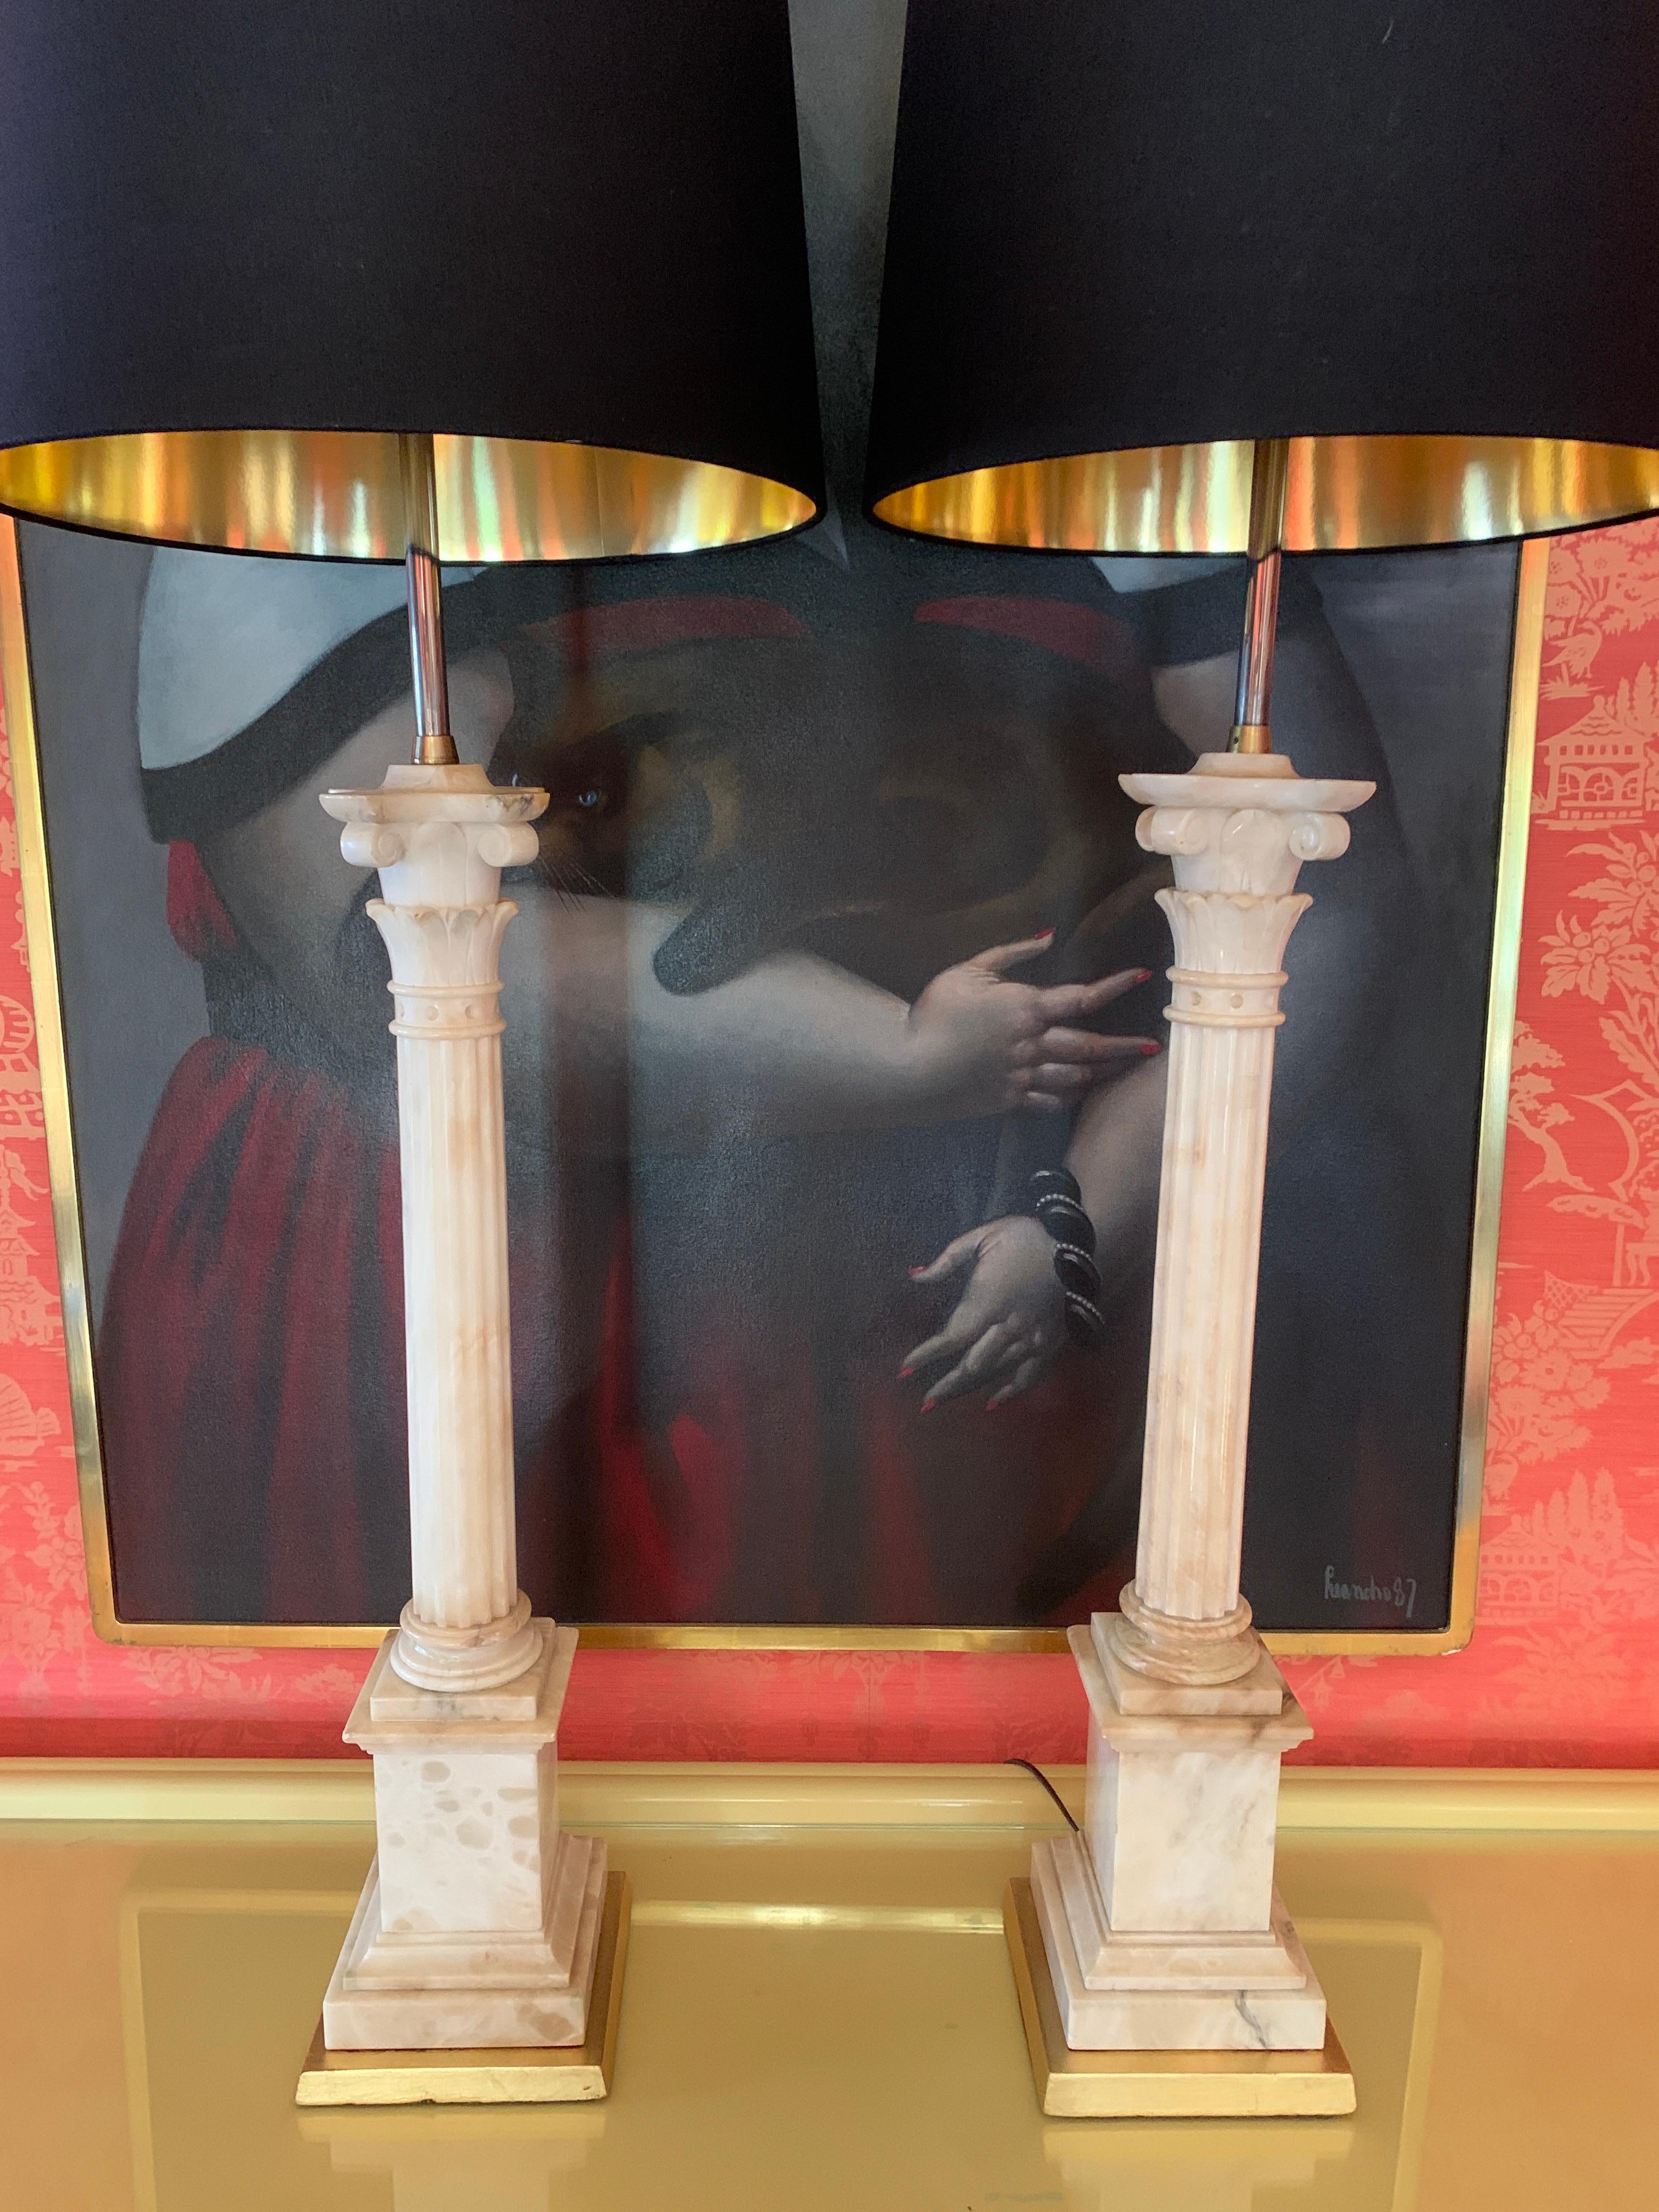 A spectacular pair of monumental marble ionic column lamps with gilt wooden bases and black silk shades with gold foil interior.
This pair are stunning, and demand a large presence. The height and form are some of the best we have seen. newly